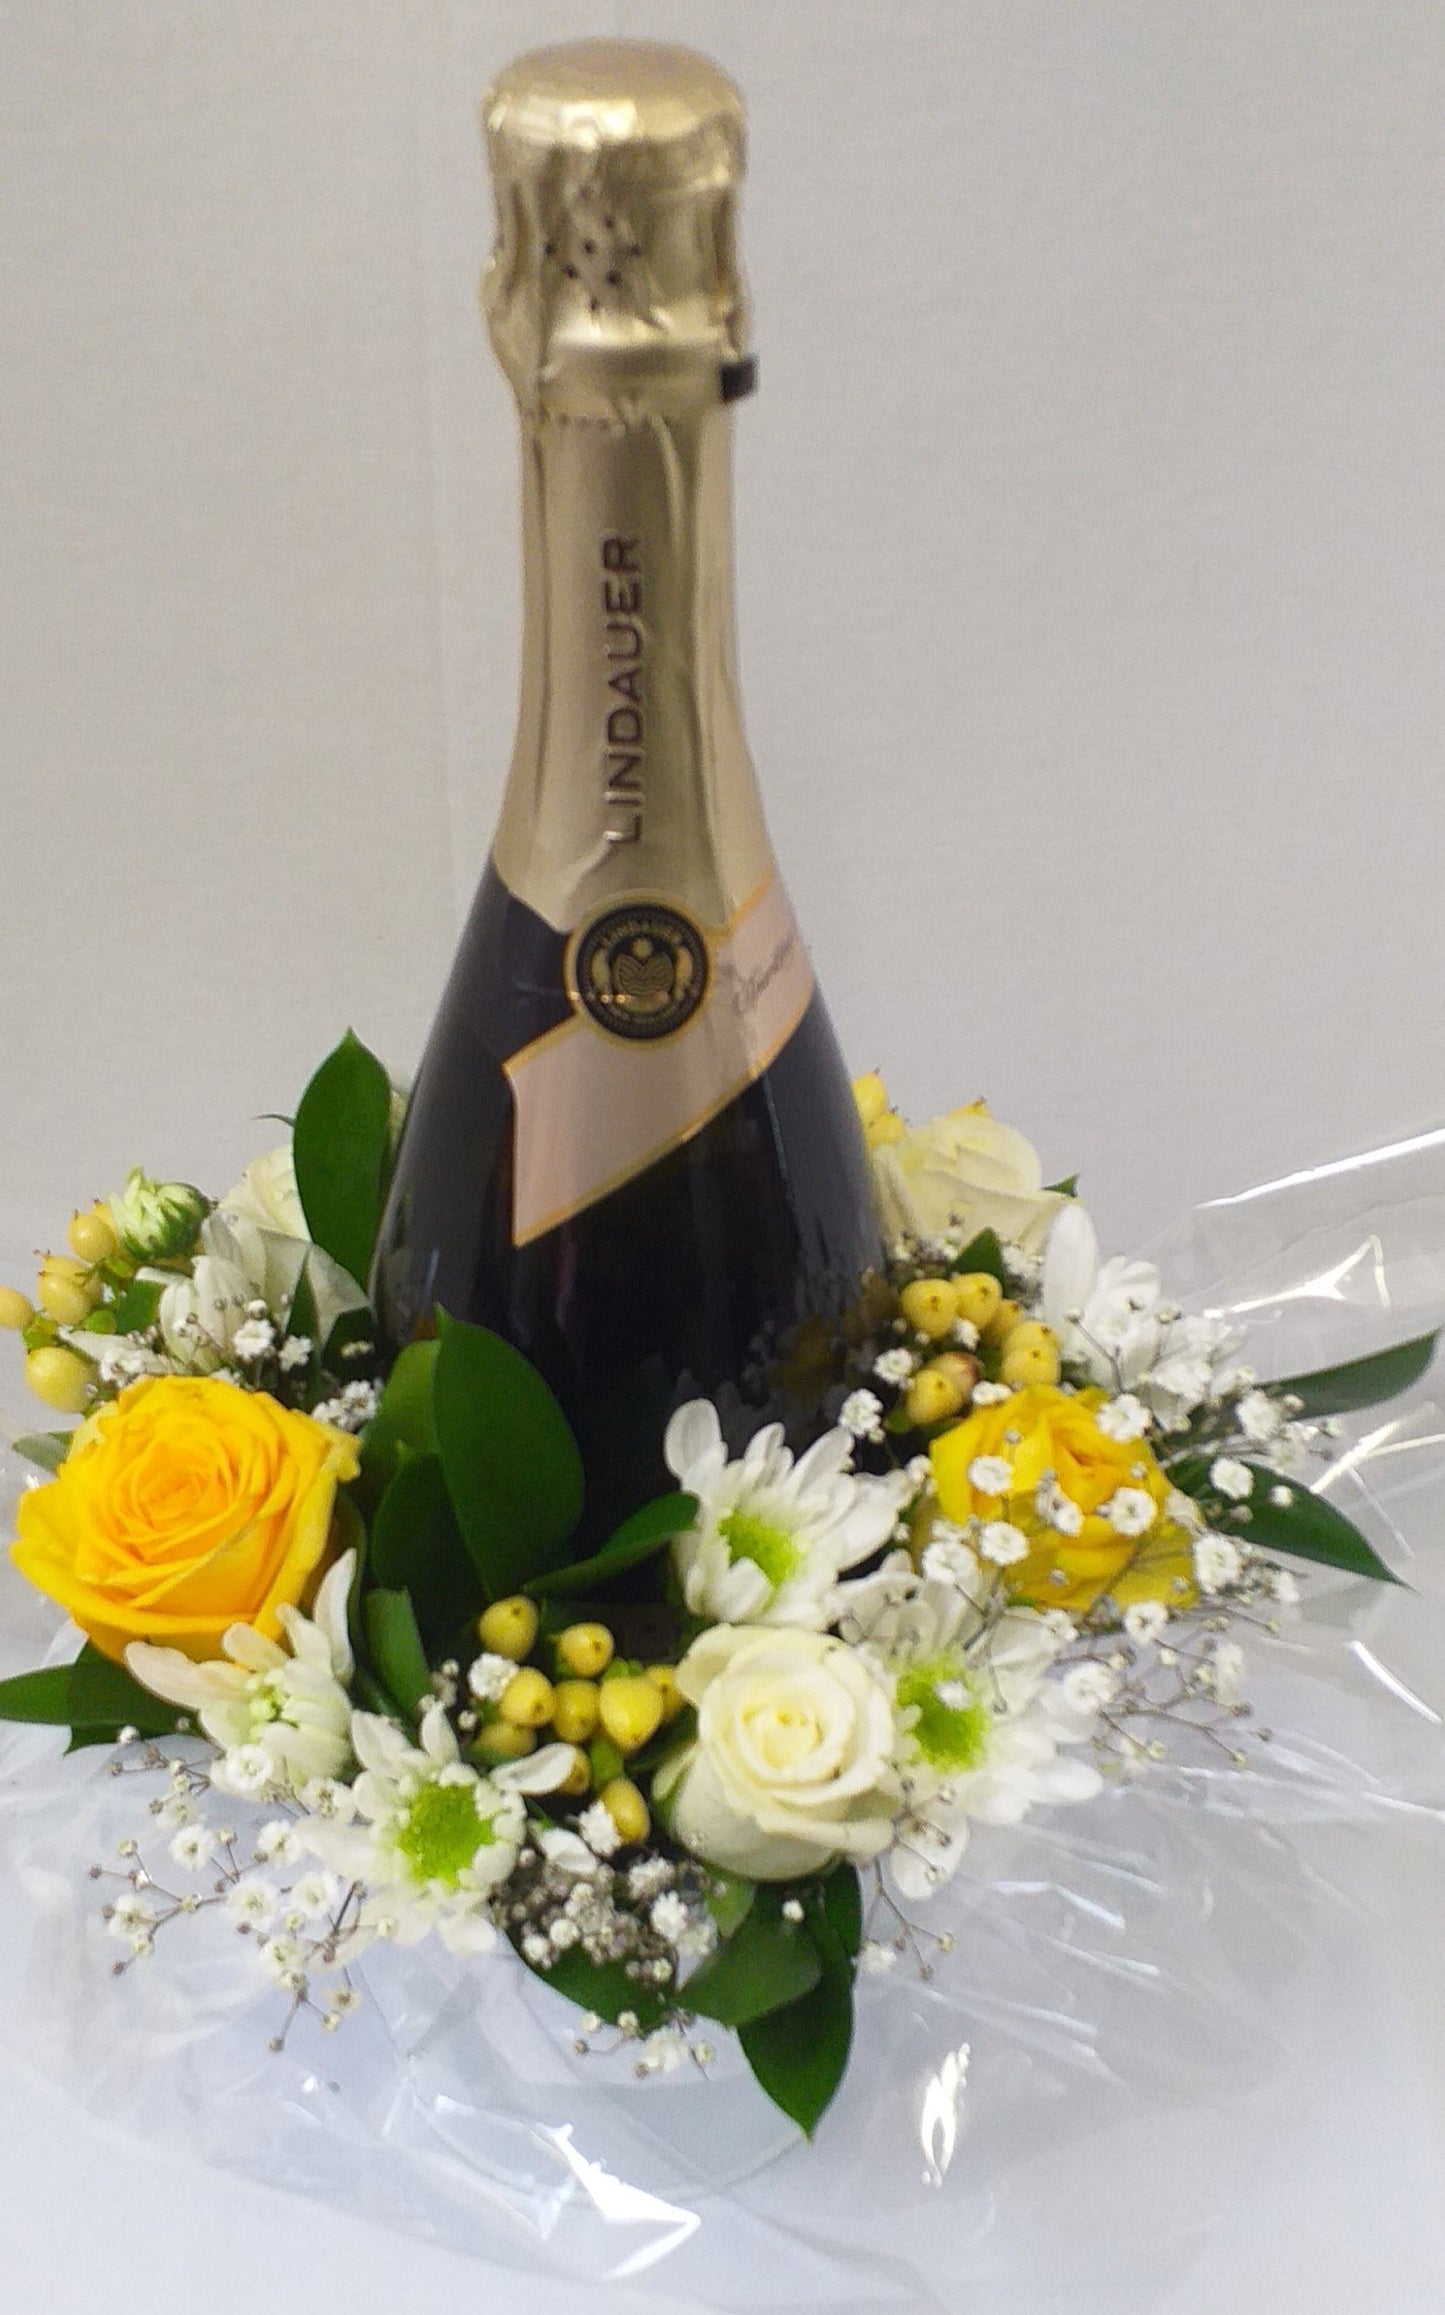 Bucket or box of champagne or wine, decorated with flowers